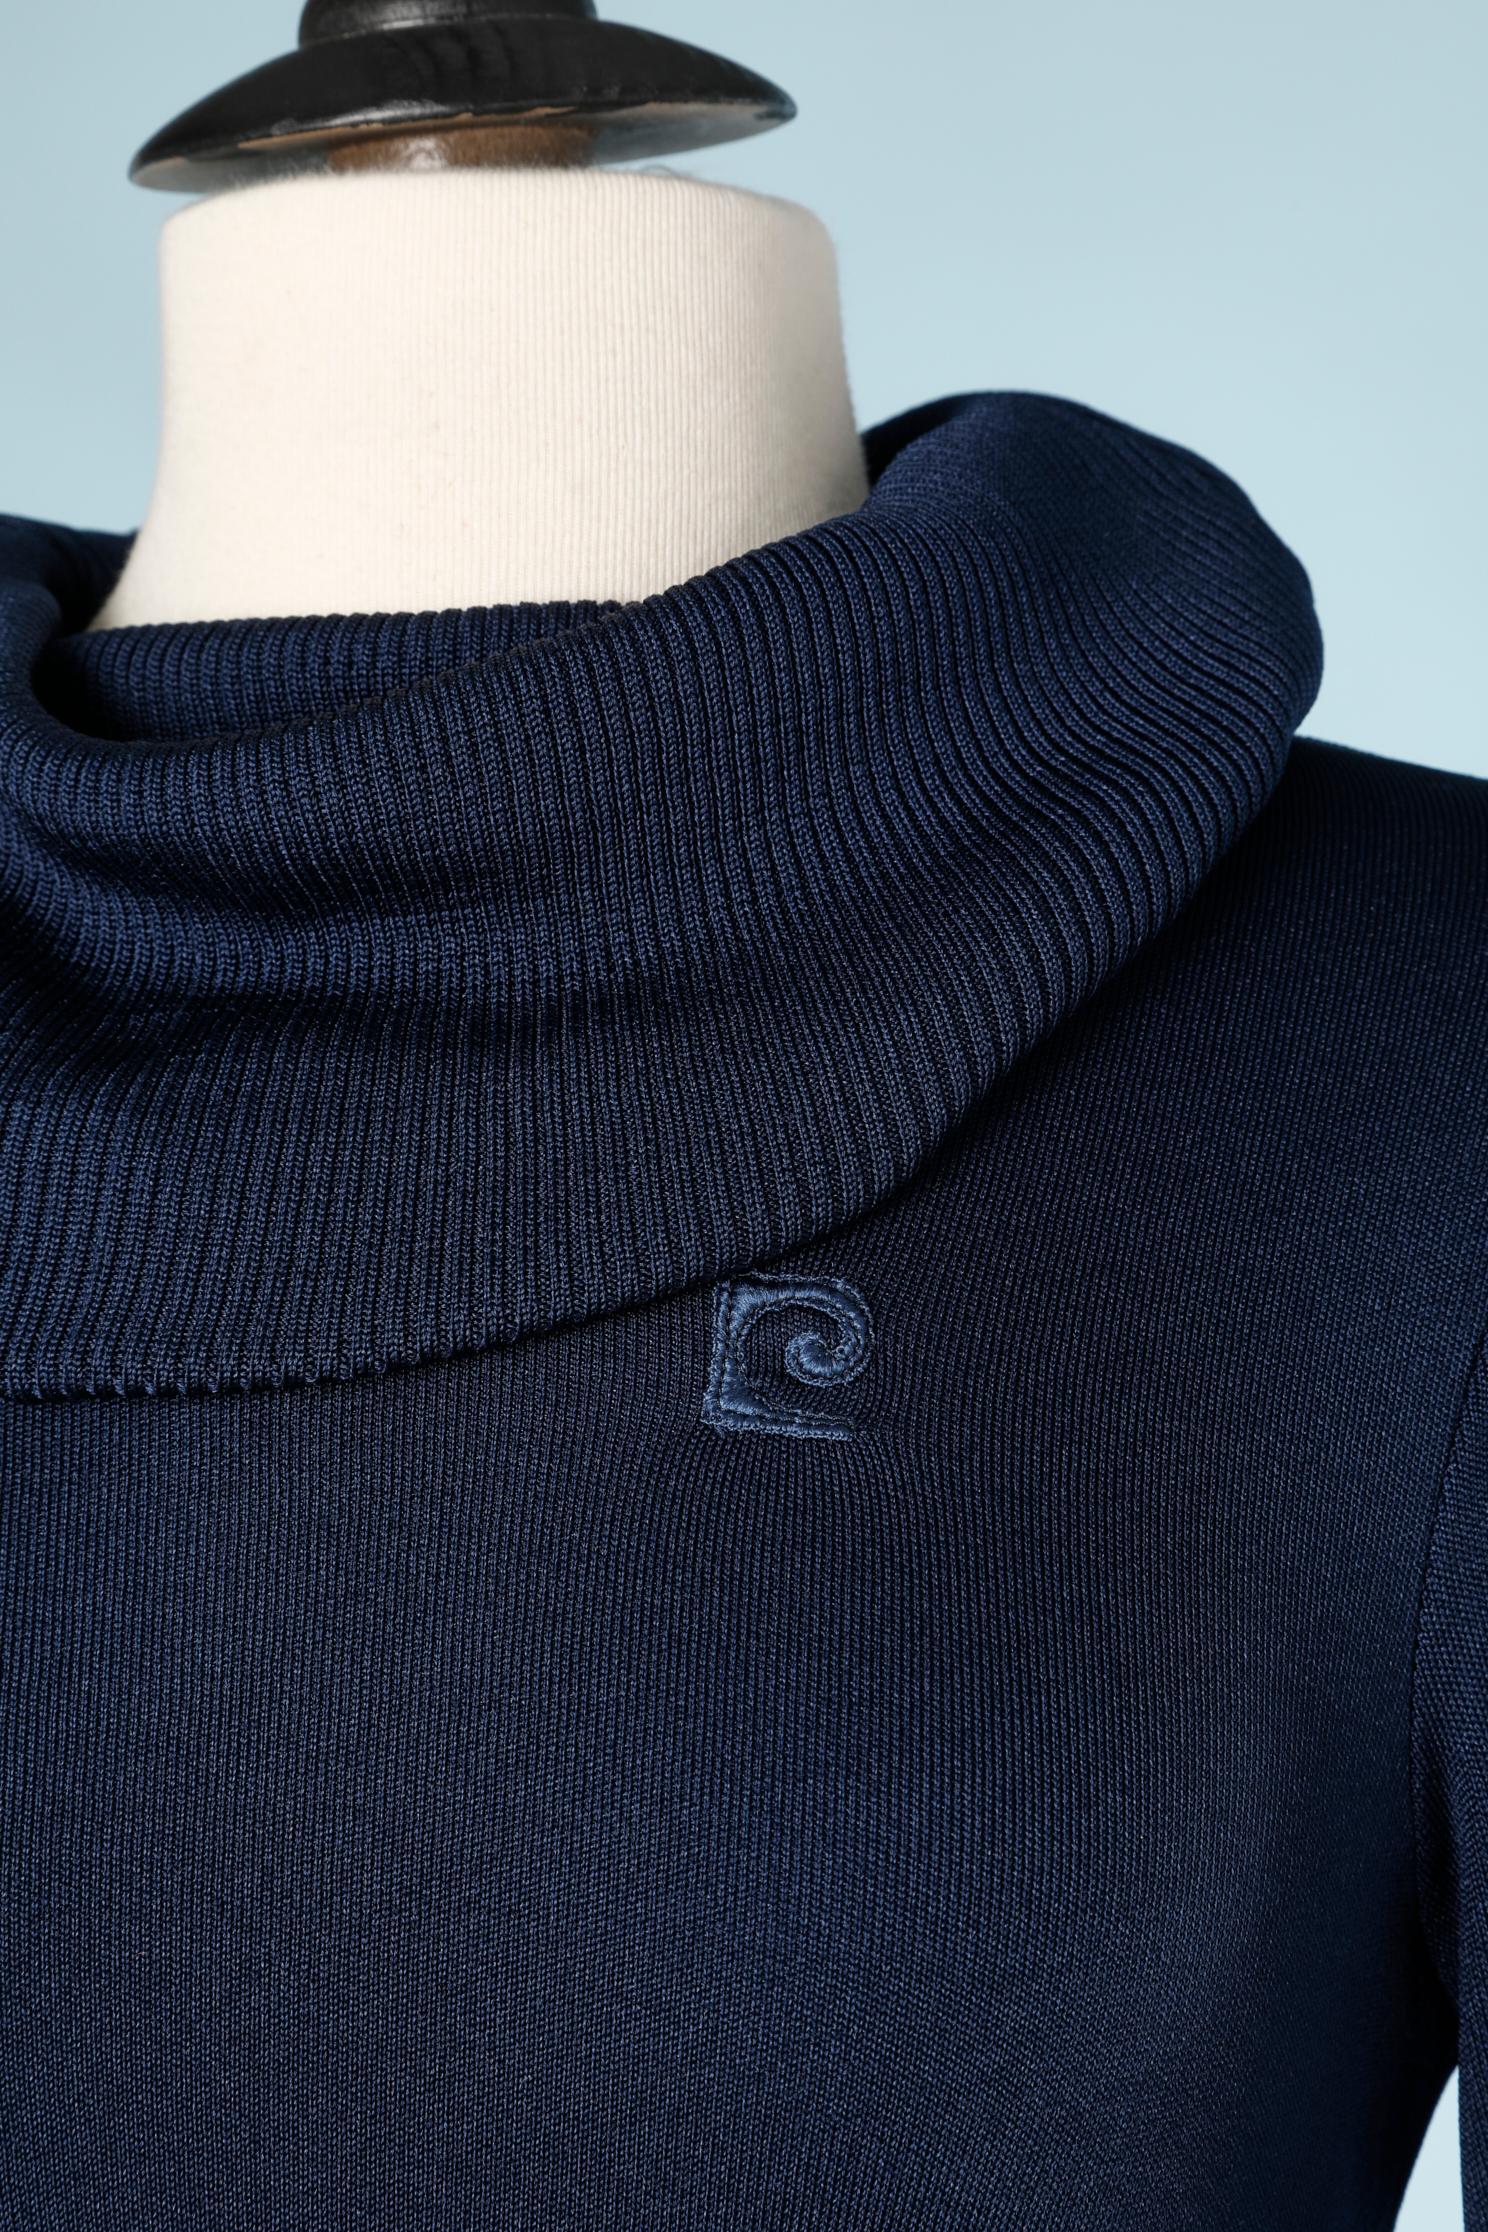 Navy blue turtle neck sweater. No fabric tag but probably nylon or acrylic. 
SIZE S 